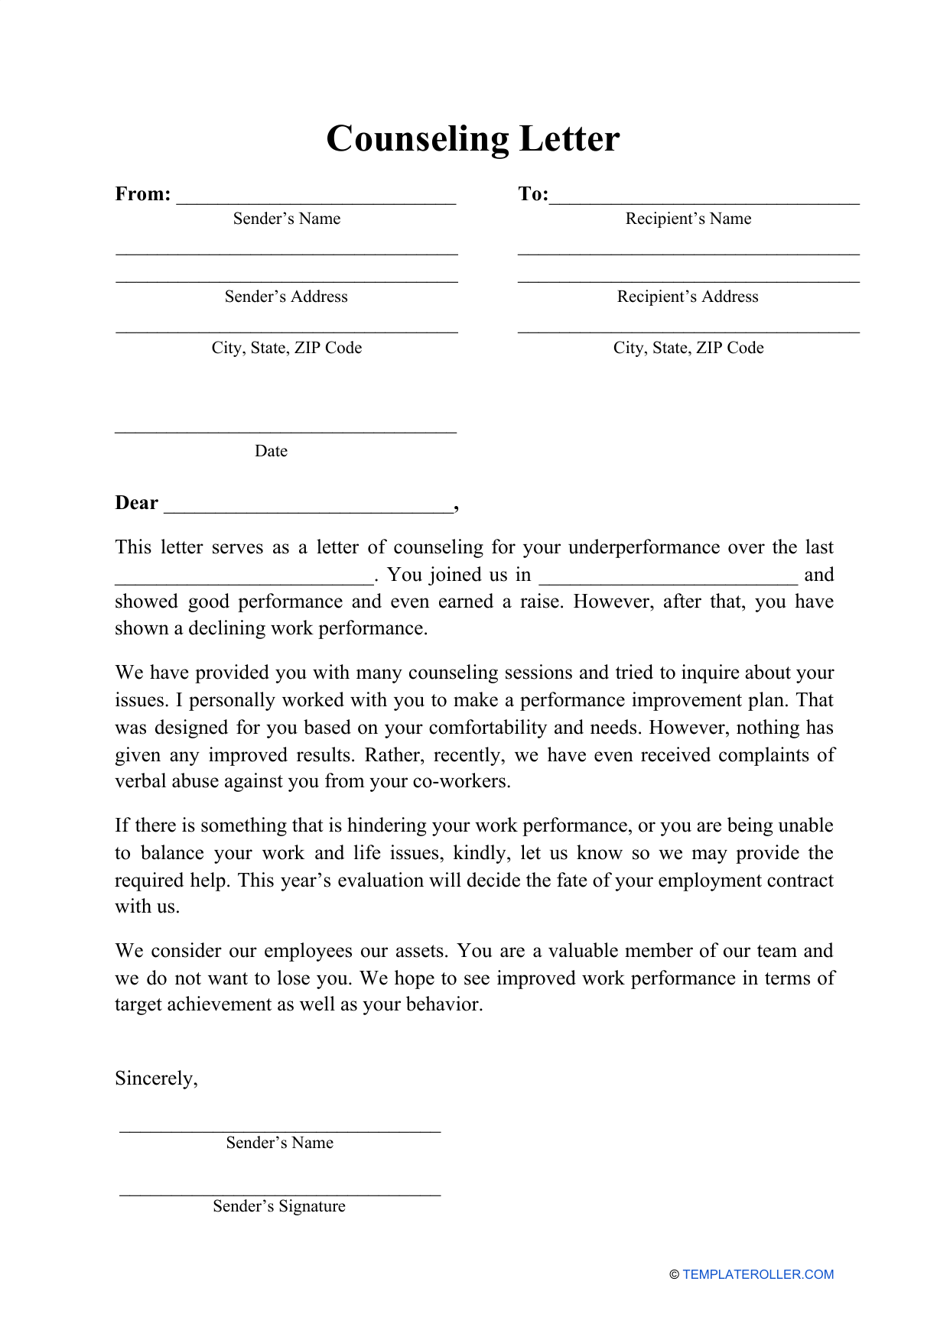 Counseling Letter Template - Preview Image